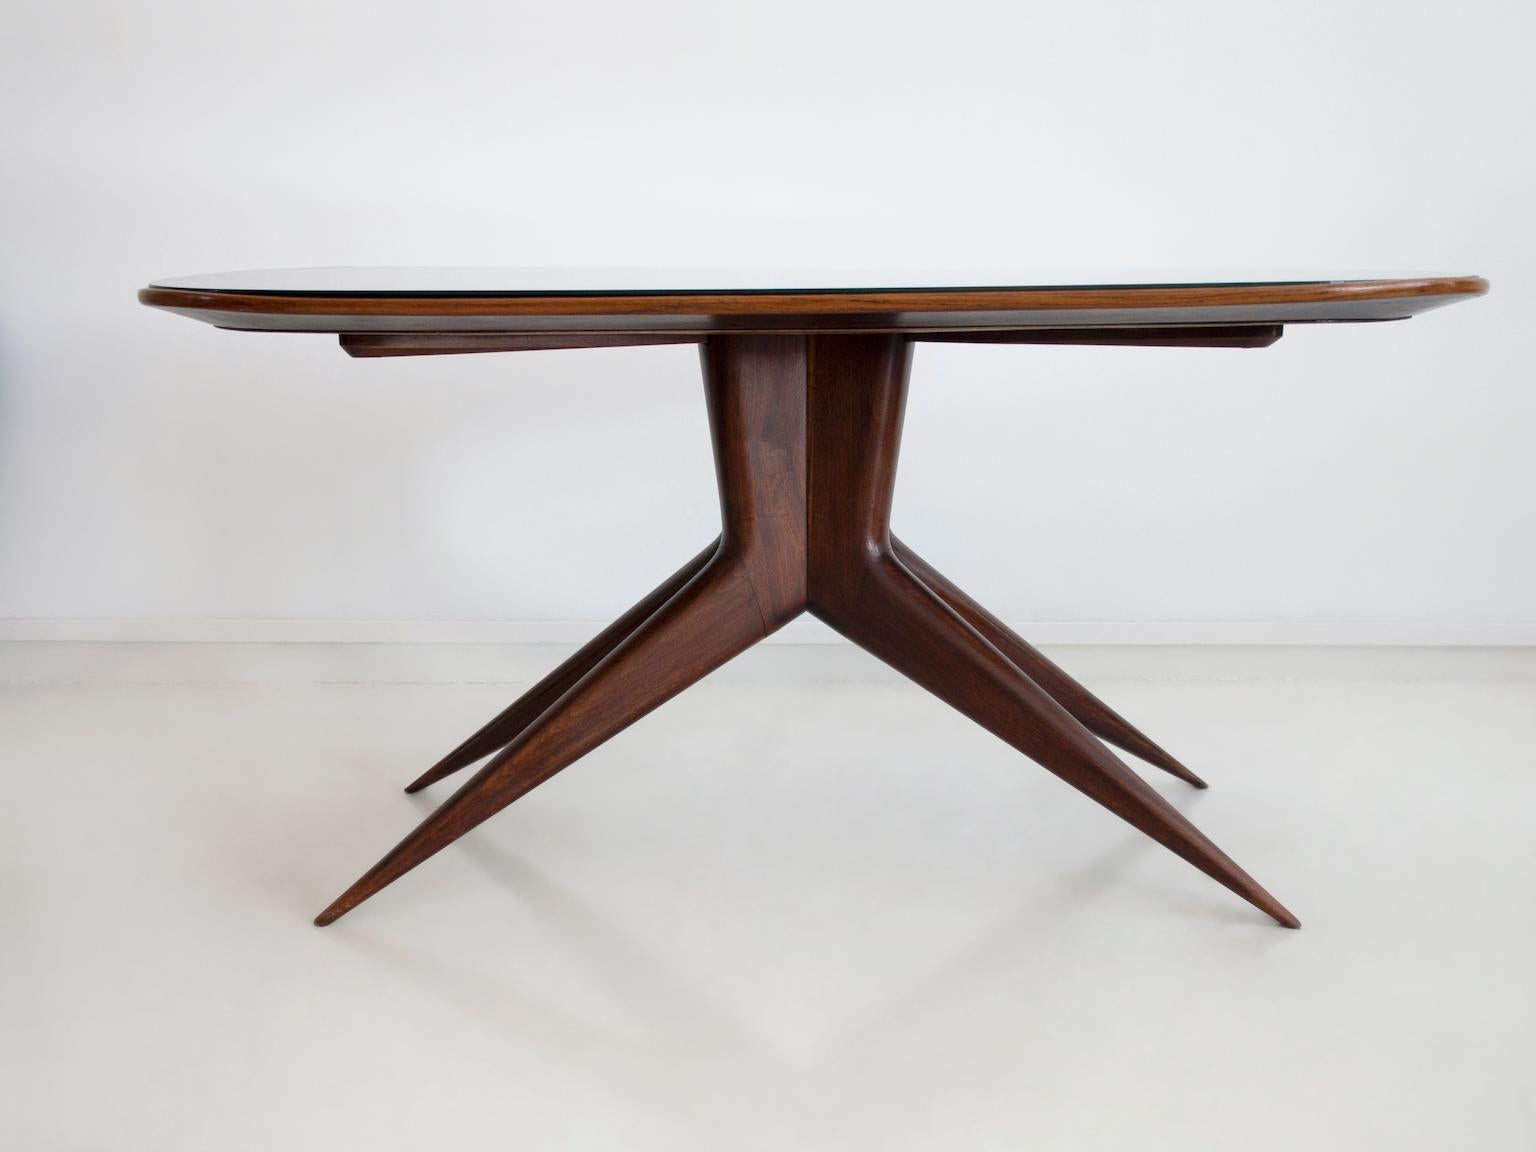 Rectangular dining table with round corners, manufactured in Italy, circa 1950. Structure made of wood, slender legs, top of dark stained crystal.